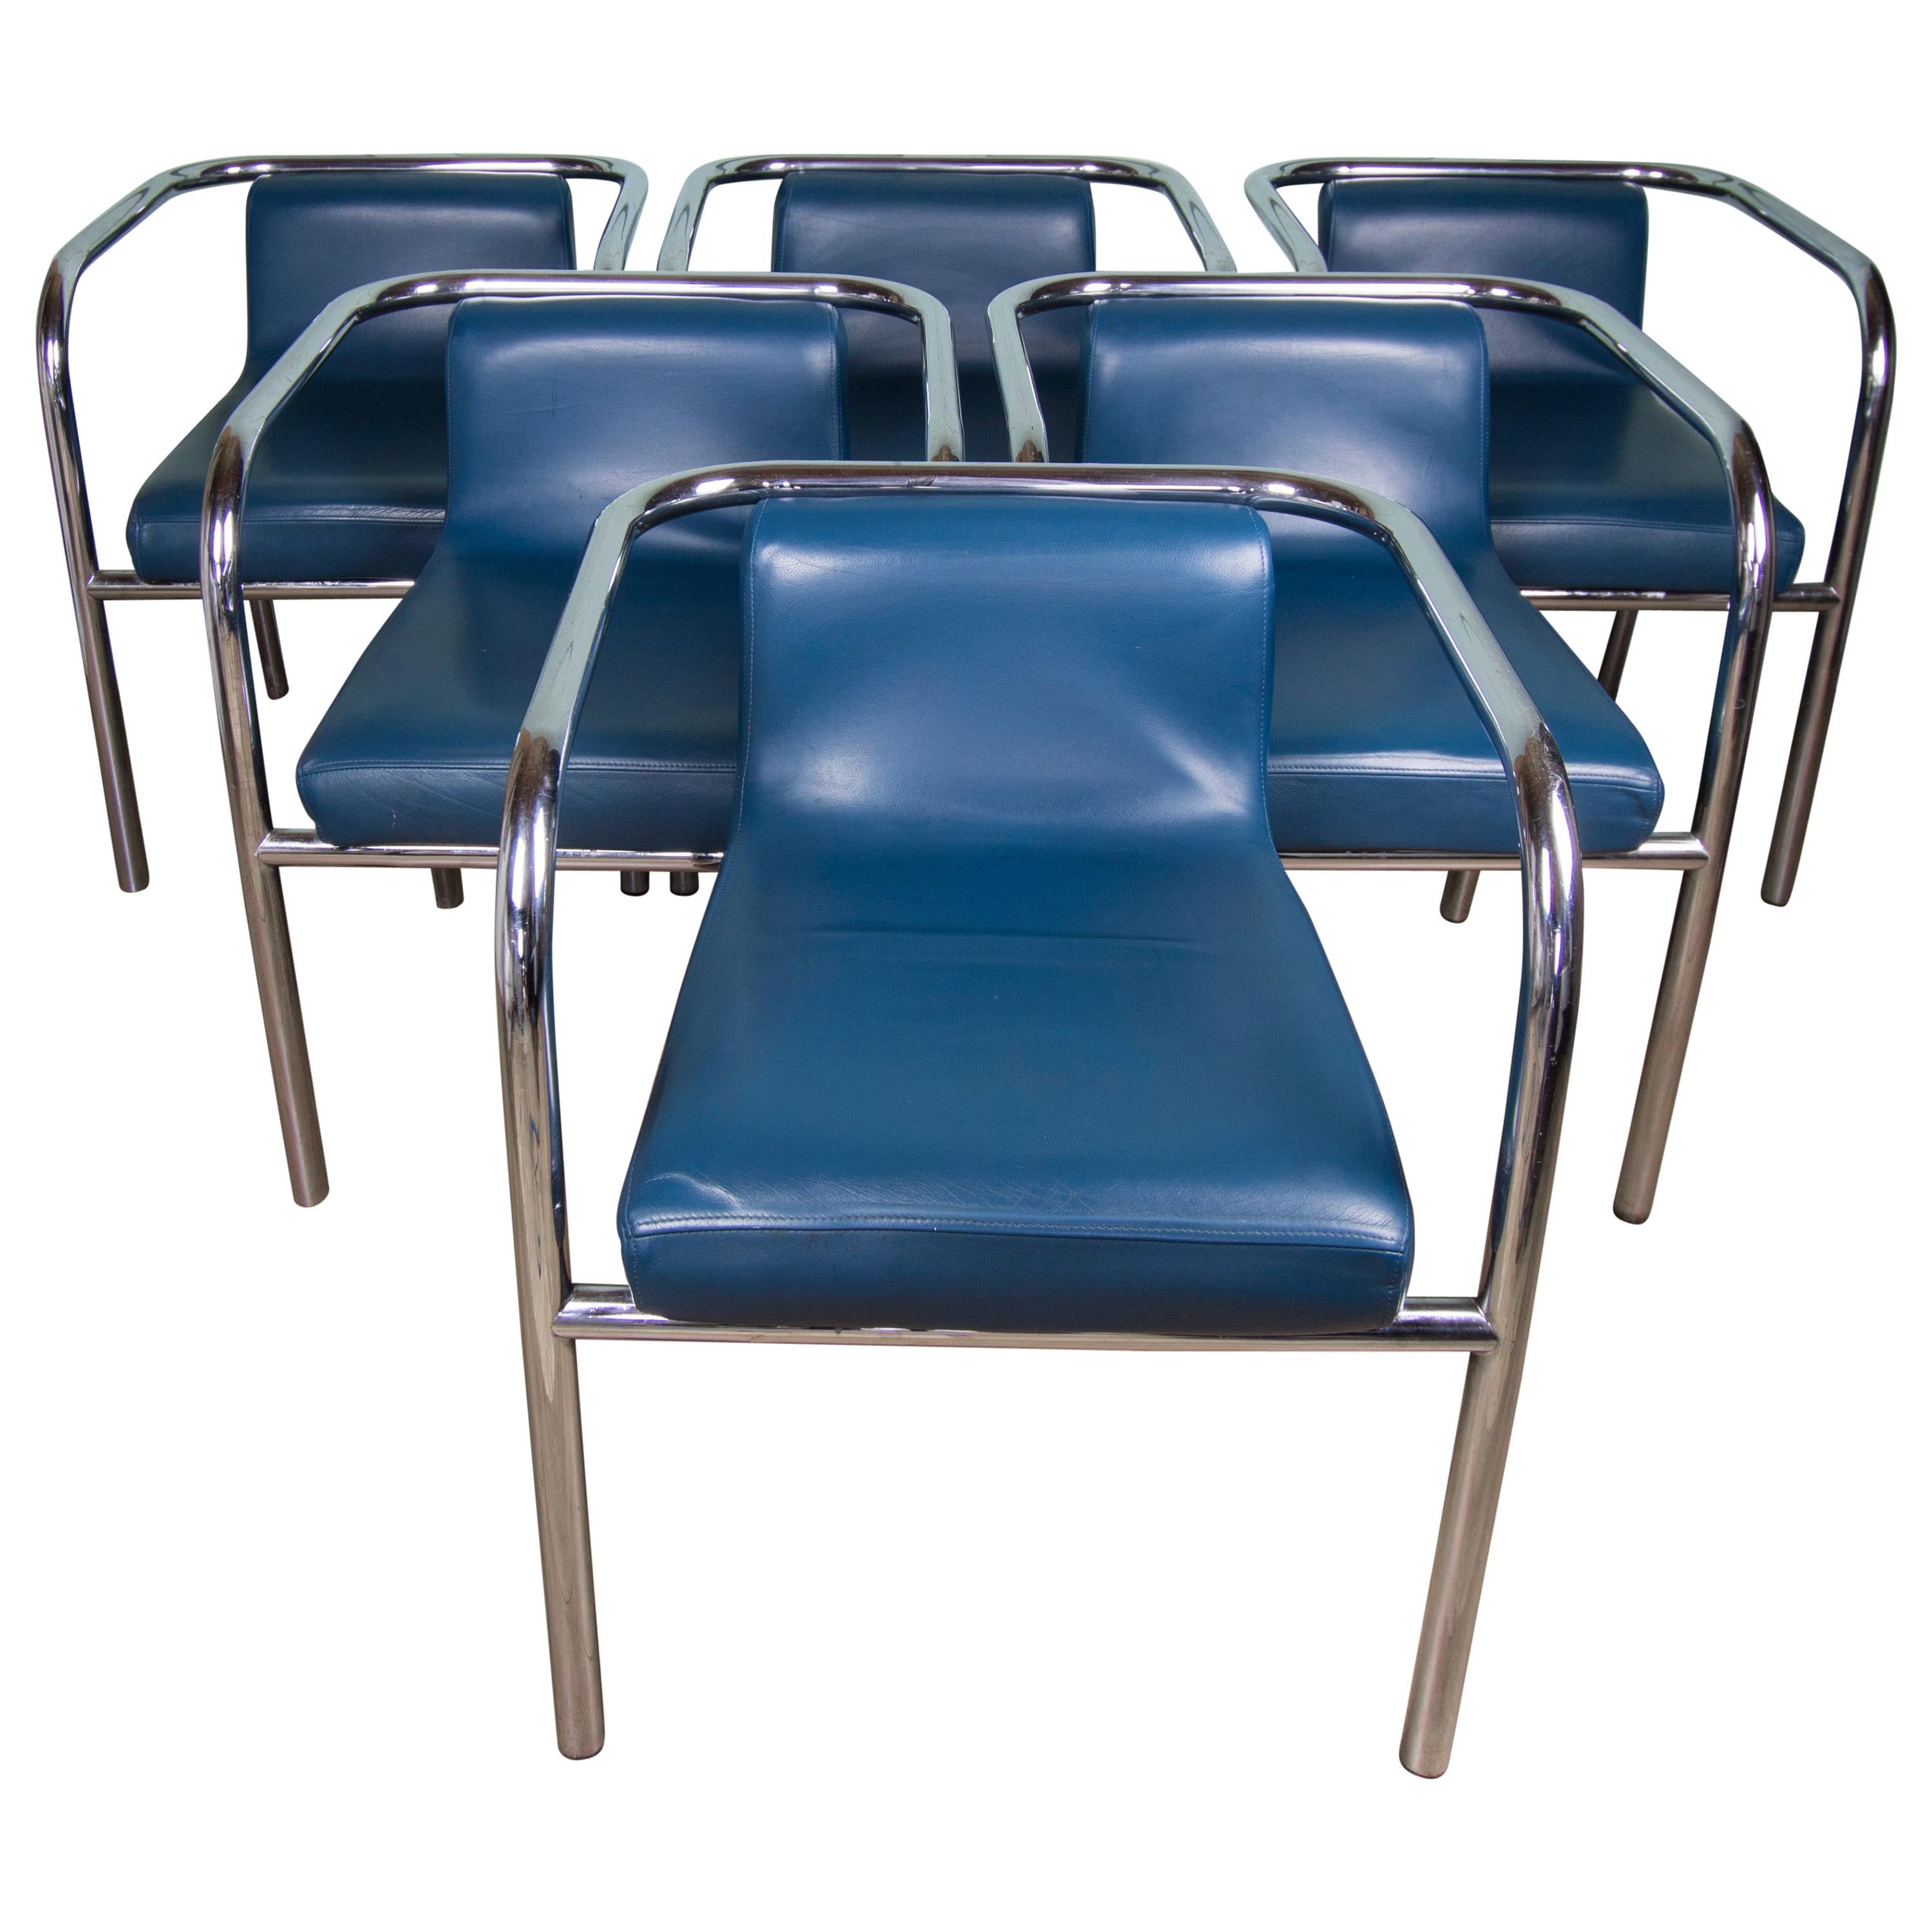 Set of Six Modernist tubular Steel chairs with Blue Leather seats